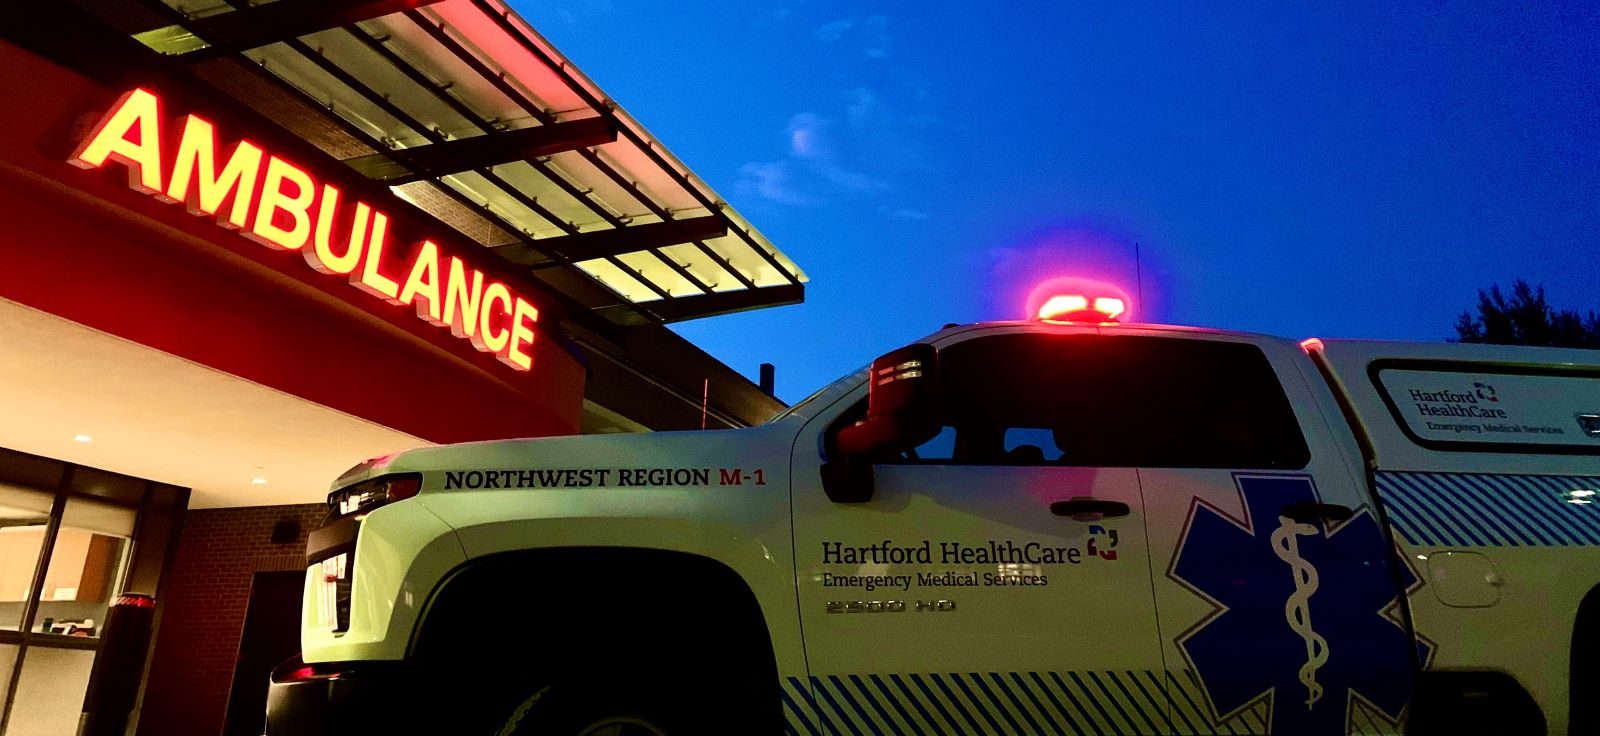 Charlotte Hungerford Paramedic Program: Delivering Life Saving Care Where and When You Need It Most